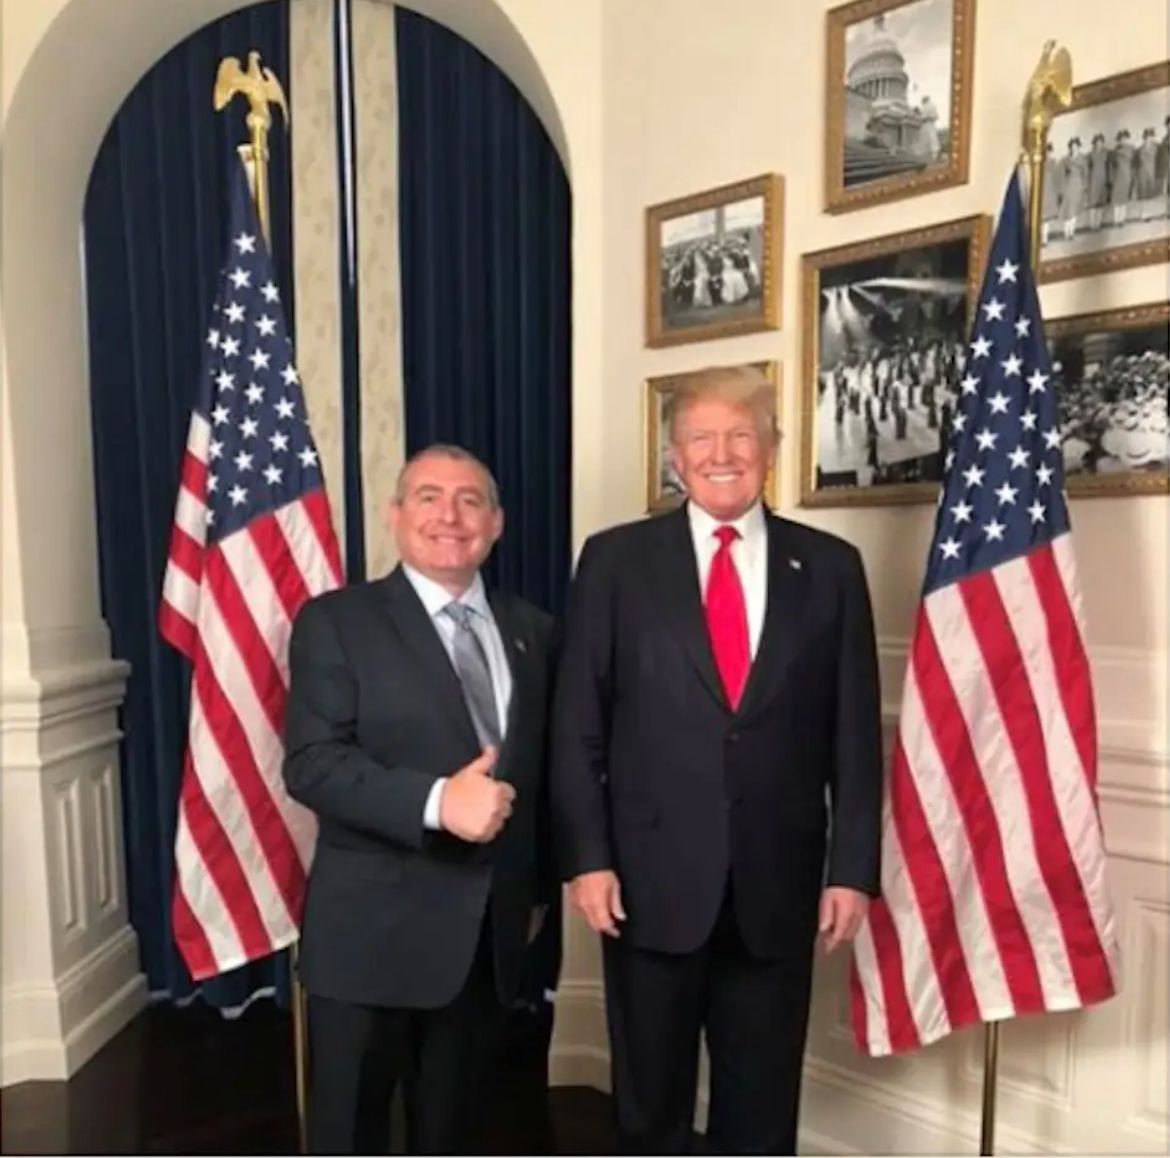 Lev Parnas shared a photo of himself with President Donald Trump on social media.